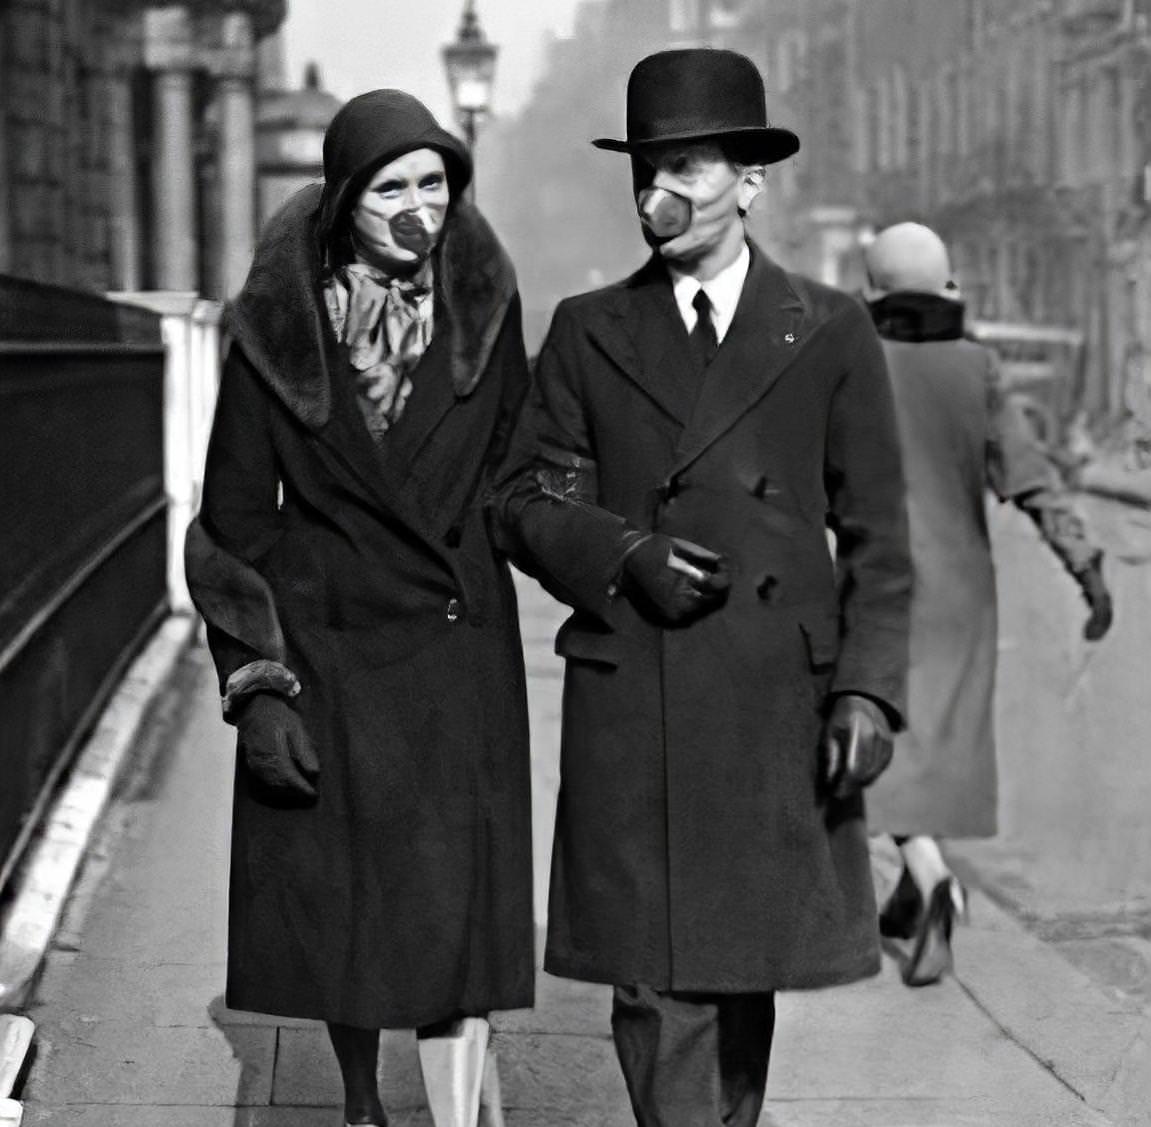 A couple wearing face masks in London, 1918.